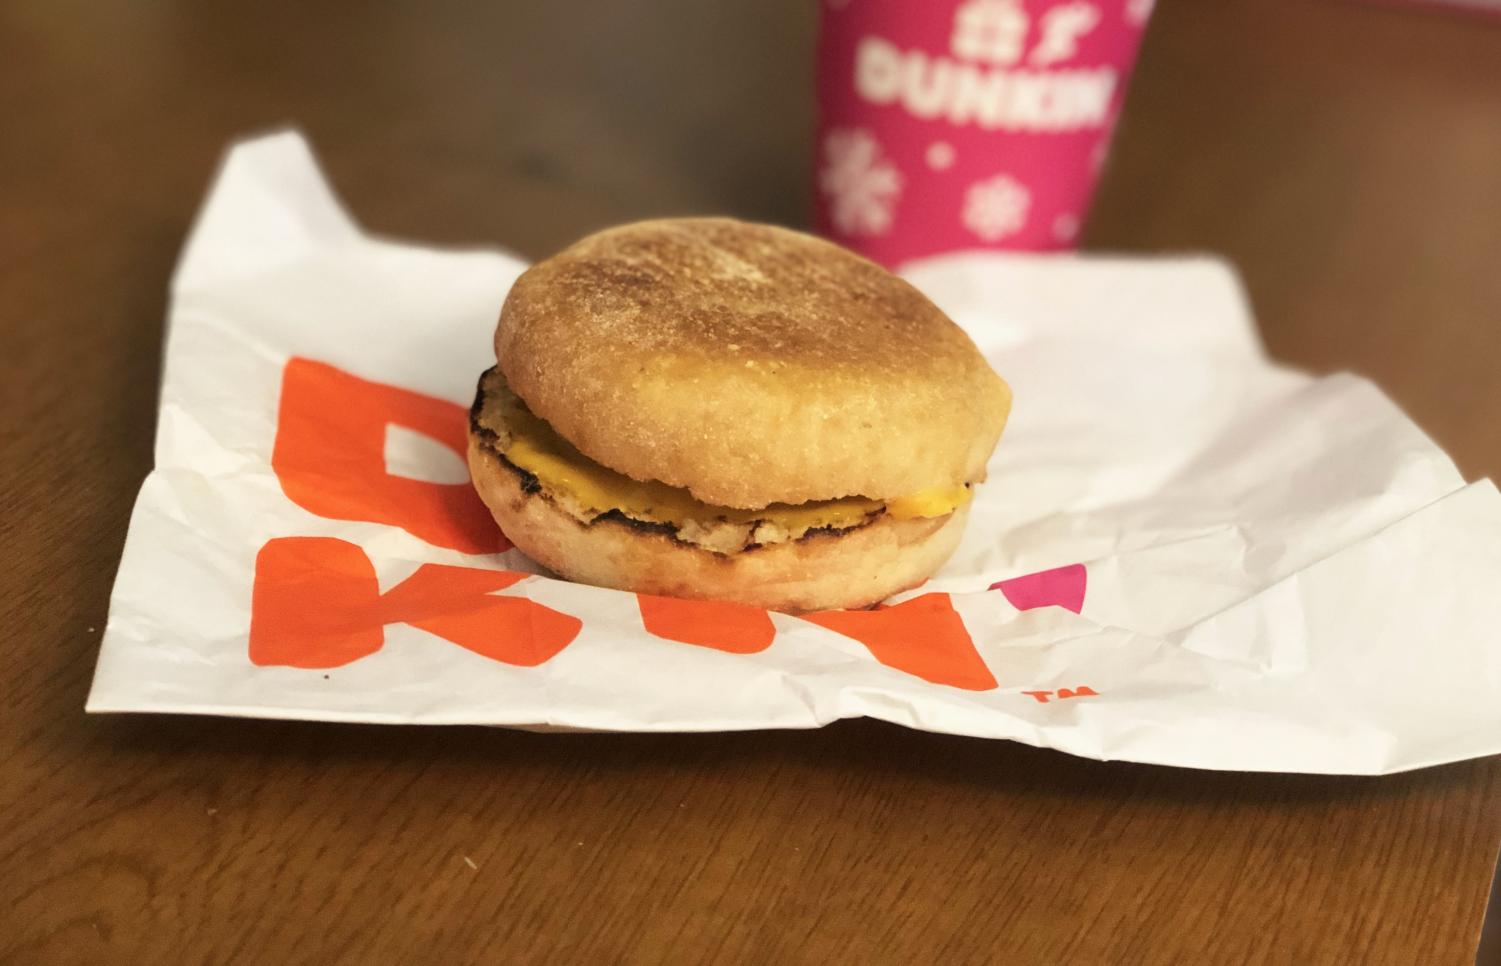 Dunkin' Donuts Beyond Sausage sandwich is the latest off-campus plant-based option.